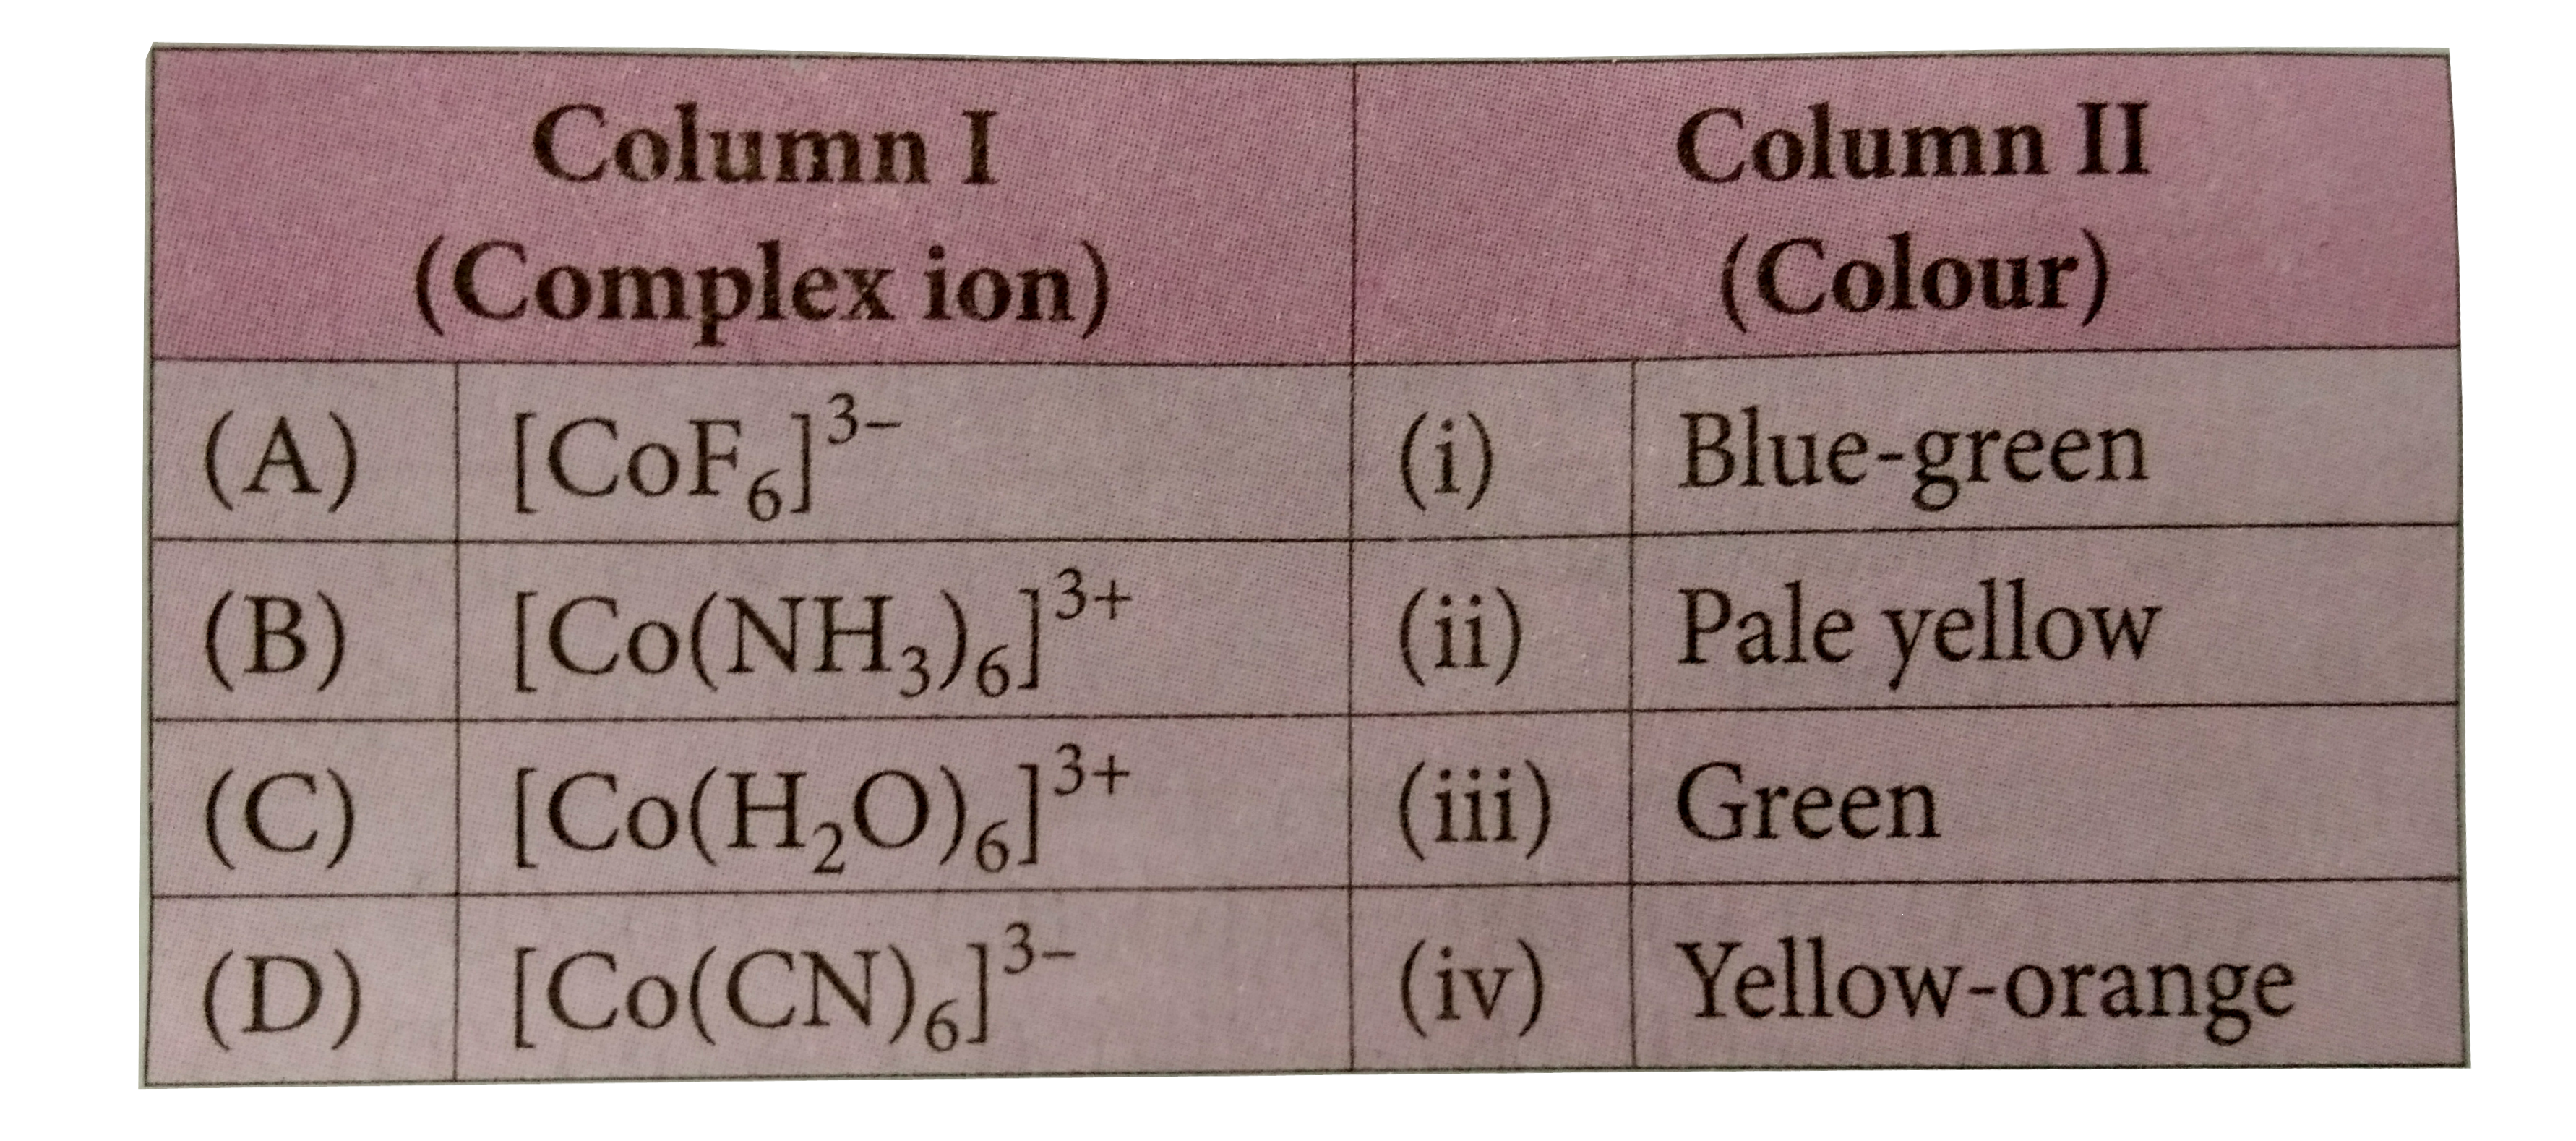 Match the complex ions given in column I with their colour given in column II and mark the appropriate choice .